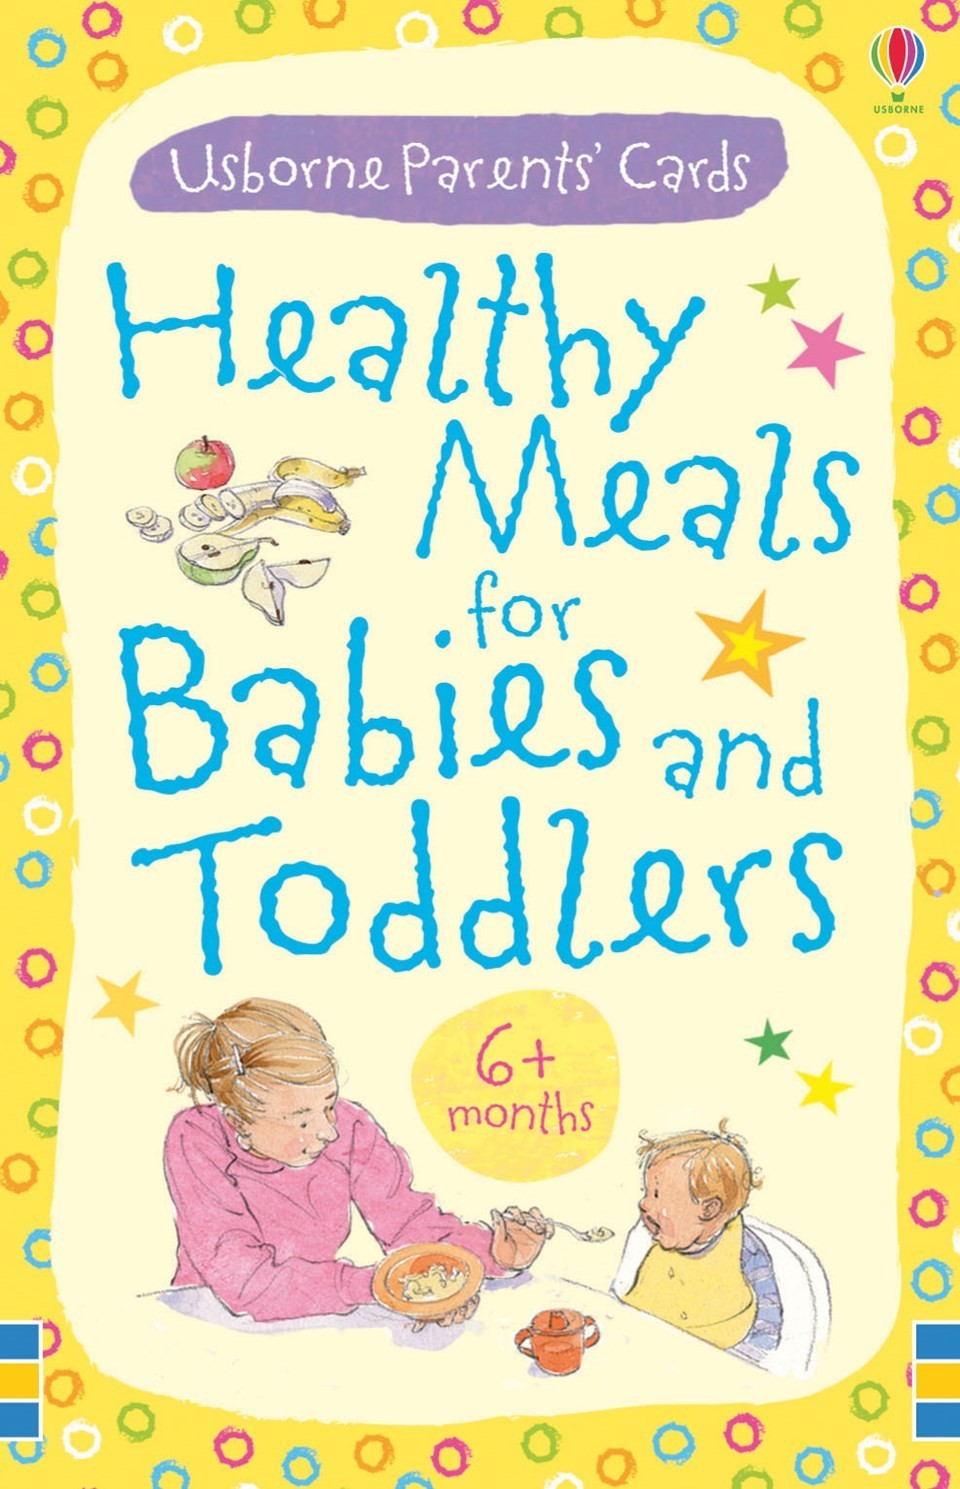 Healthy meals for babies and toddlers: 6+ months